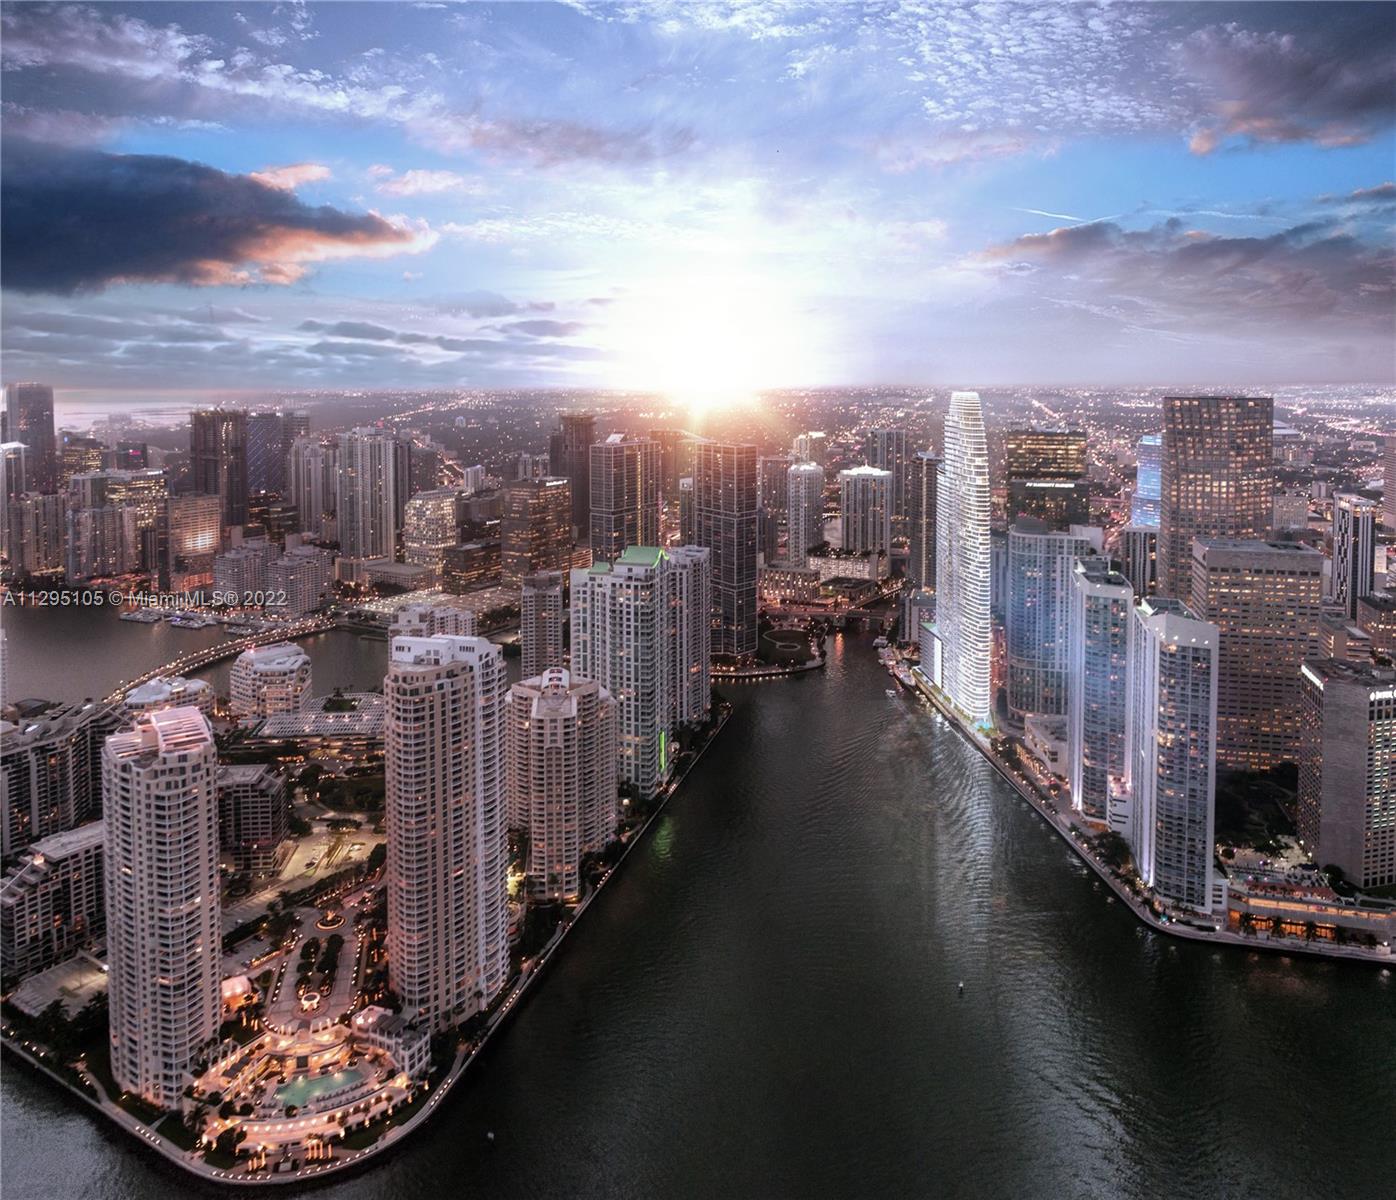 Your home in the sky. Construction is well underway. Aston Martin's first exclusively branded residential high rise with an estimated delivery in 2023. In this first exclusive development partnership with Aston Martin, the interiors are inspired by the brand's 105 year history, DNA and esthetic through subtle details and craftsmanship while taking into consideration Miami's tropical and exciting environment. The residential only tower will be over 800' as the tallest condominium tower south of NYC with 391 units, over 42,000 sq ft of sky amenities and timeless finishes.